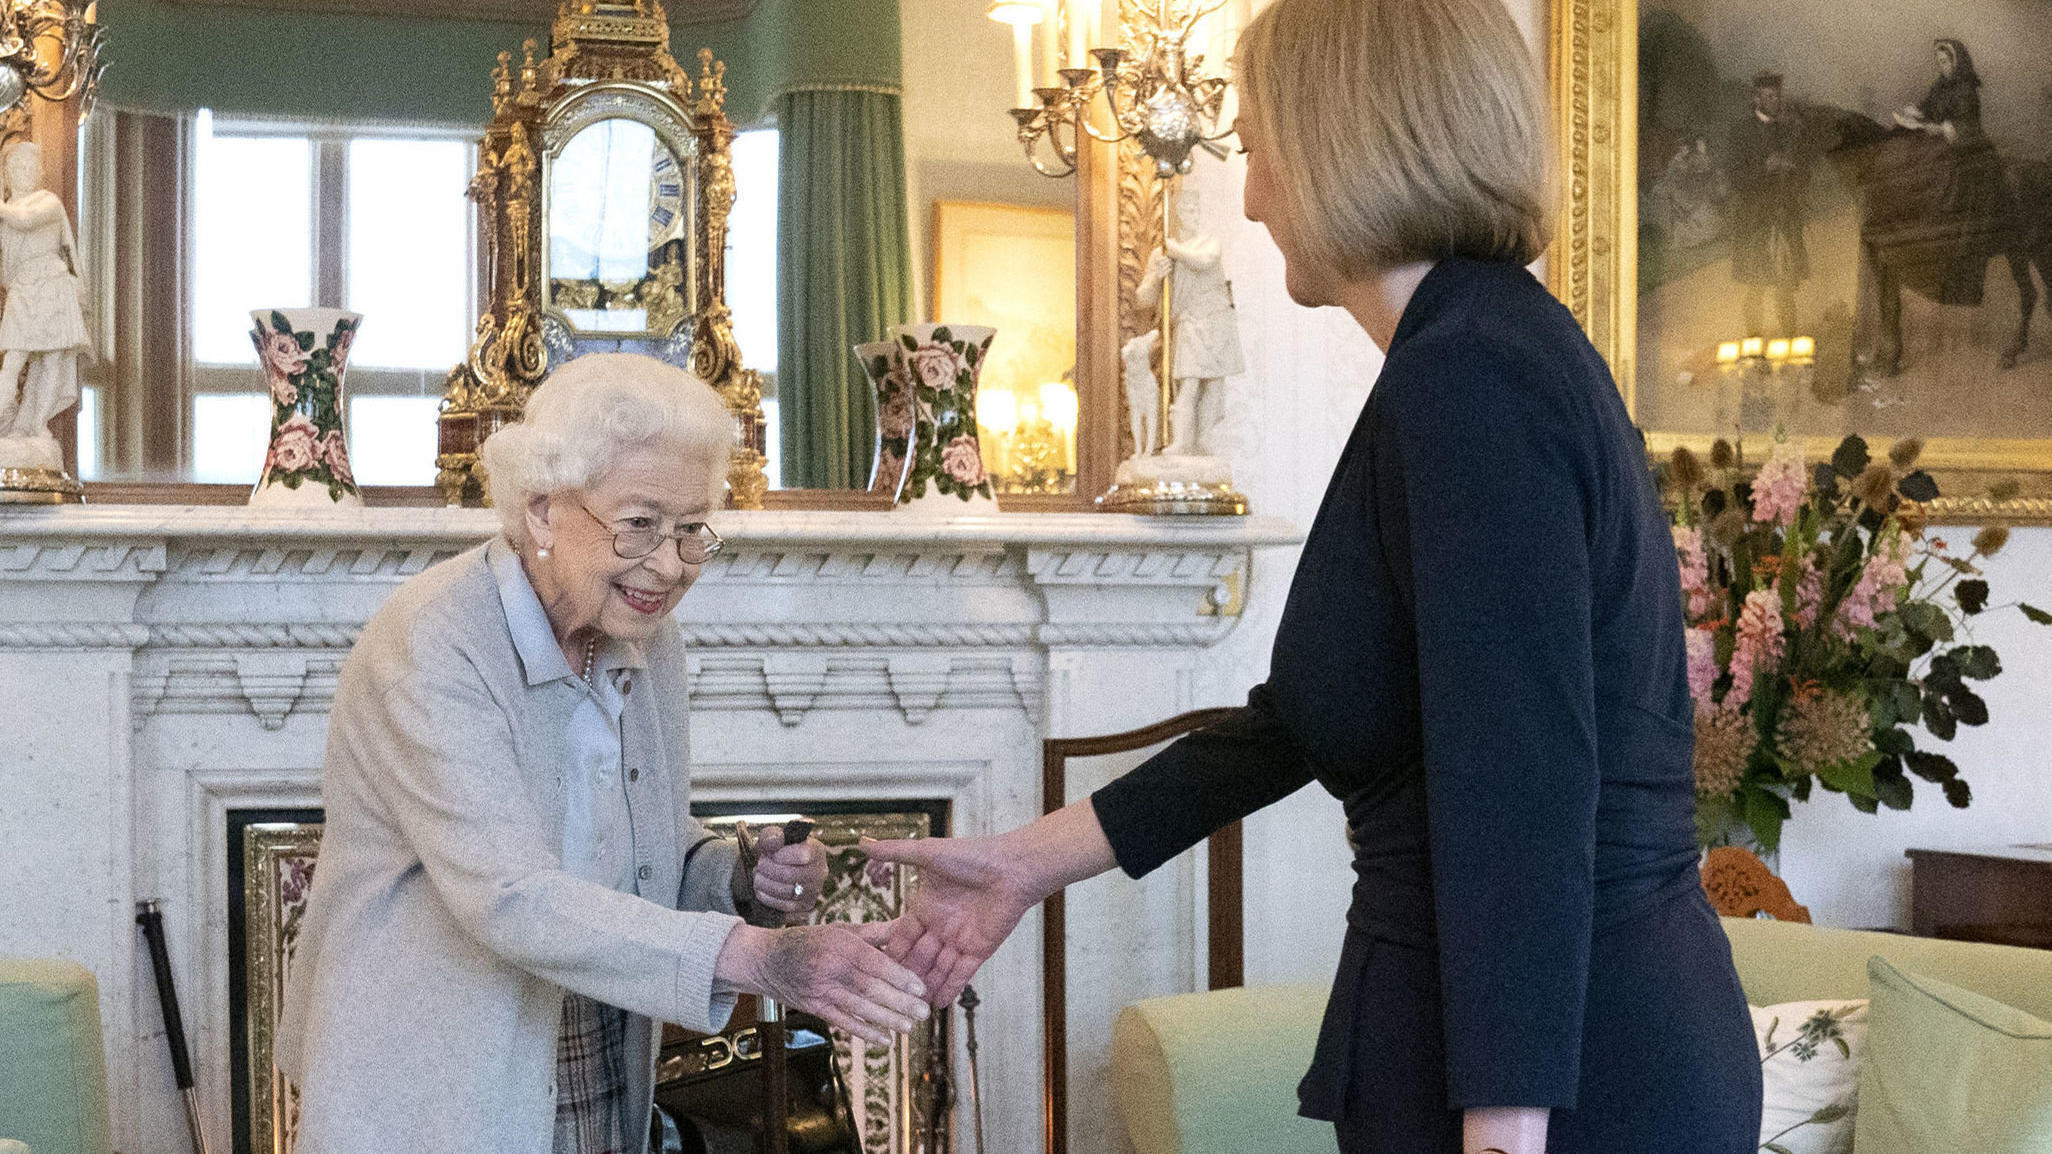 FILE - Britain's Queen Elizabeth II, left, welcomes Liz Truss during an audience at Balmoral, Scotland, where she invited the newly elected leader of the Conservative party to become Prime Minister and form a new government, Tuesday, Sept. 6, 2022. Q